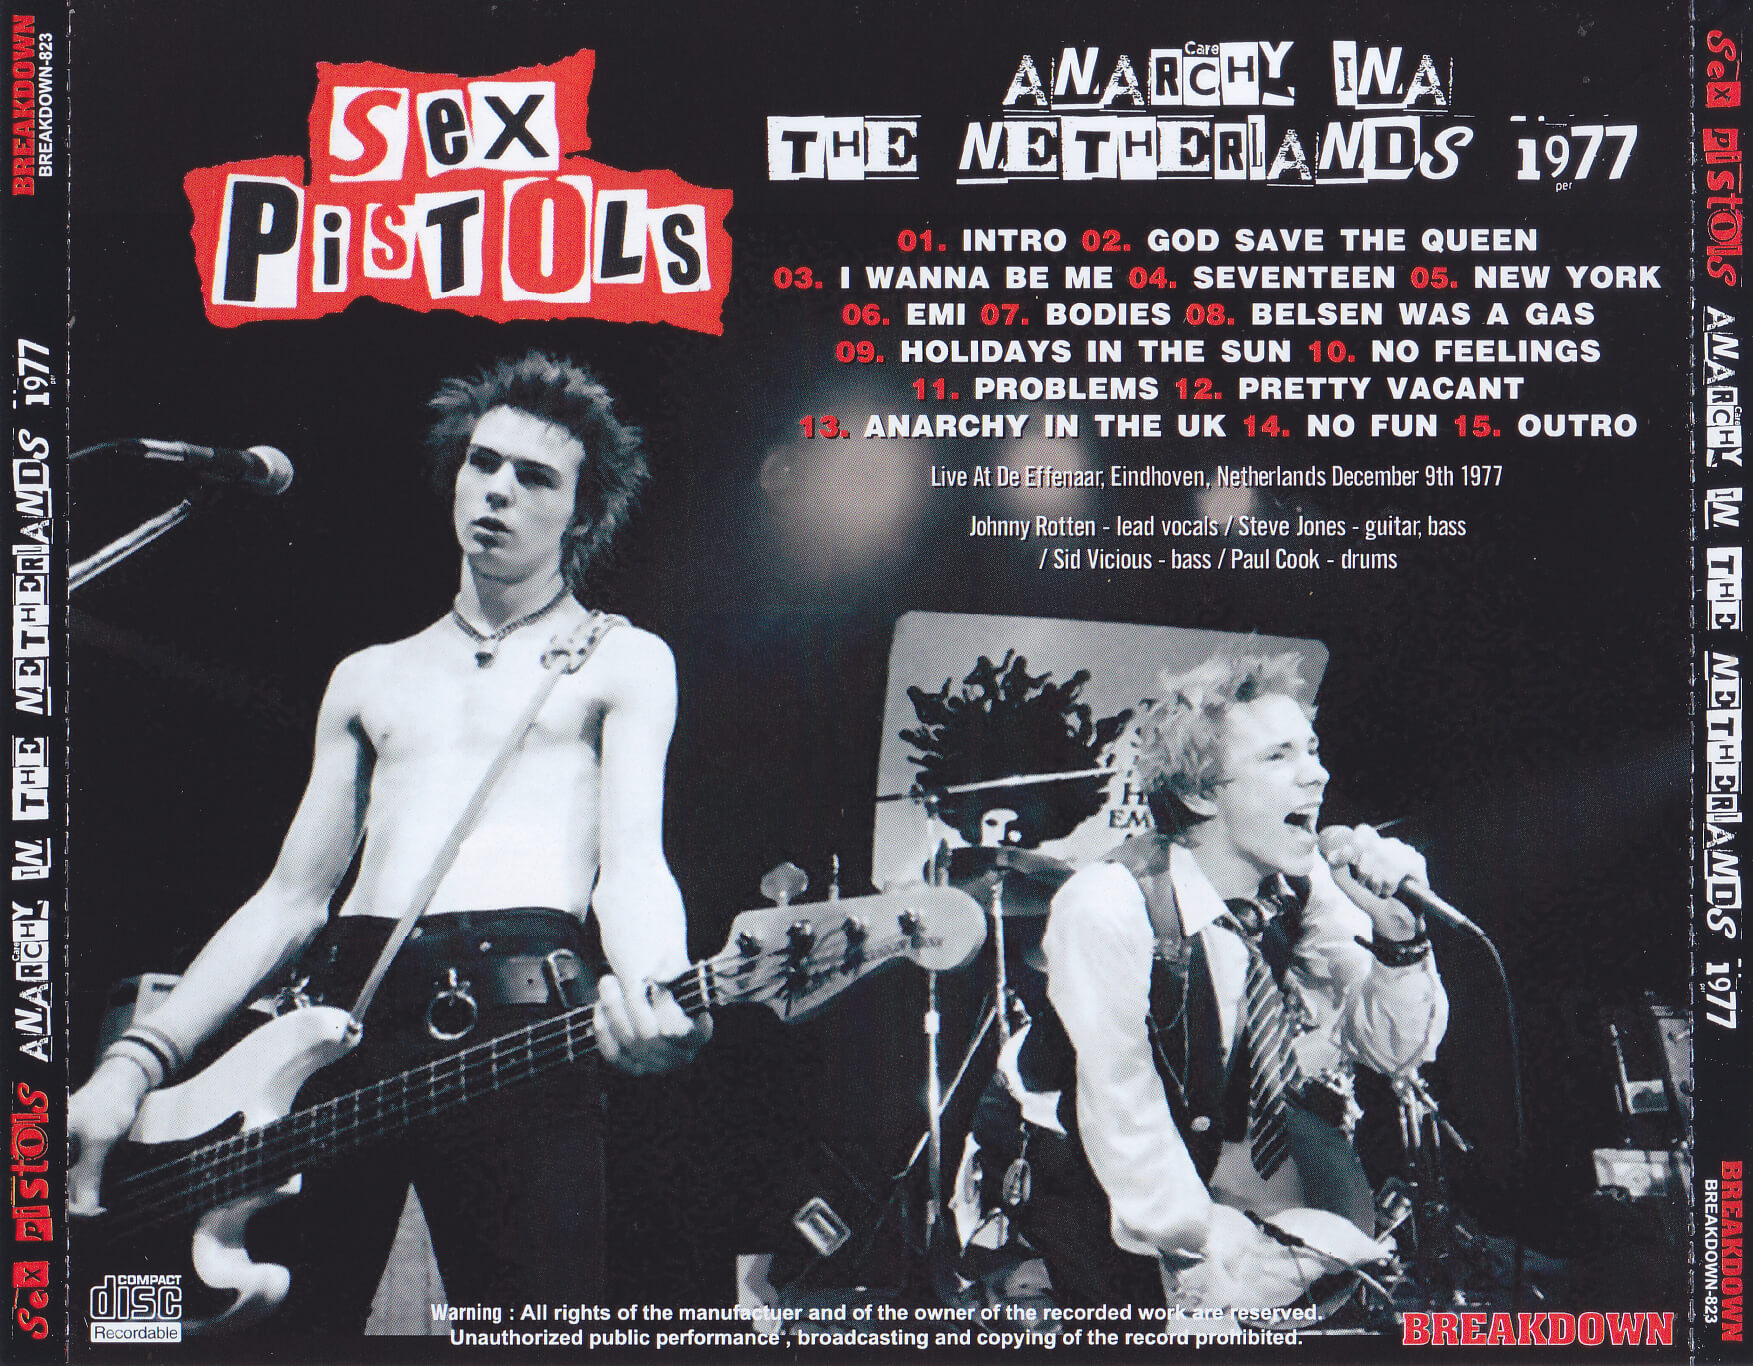 Sex Pistols / Anarchy In The Netherlands 1977 / 1CDR – GiGinJapan